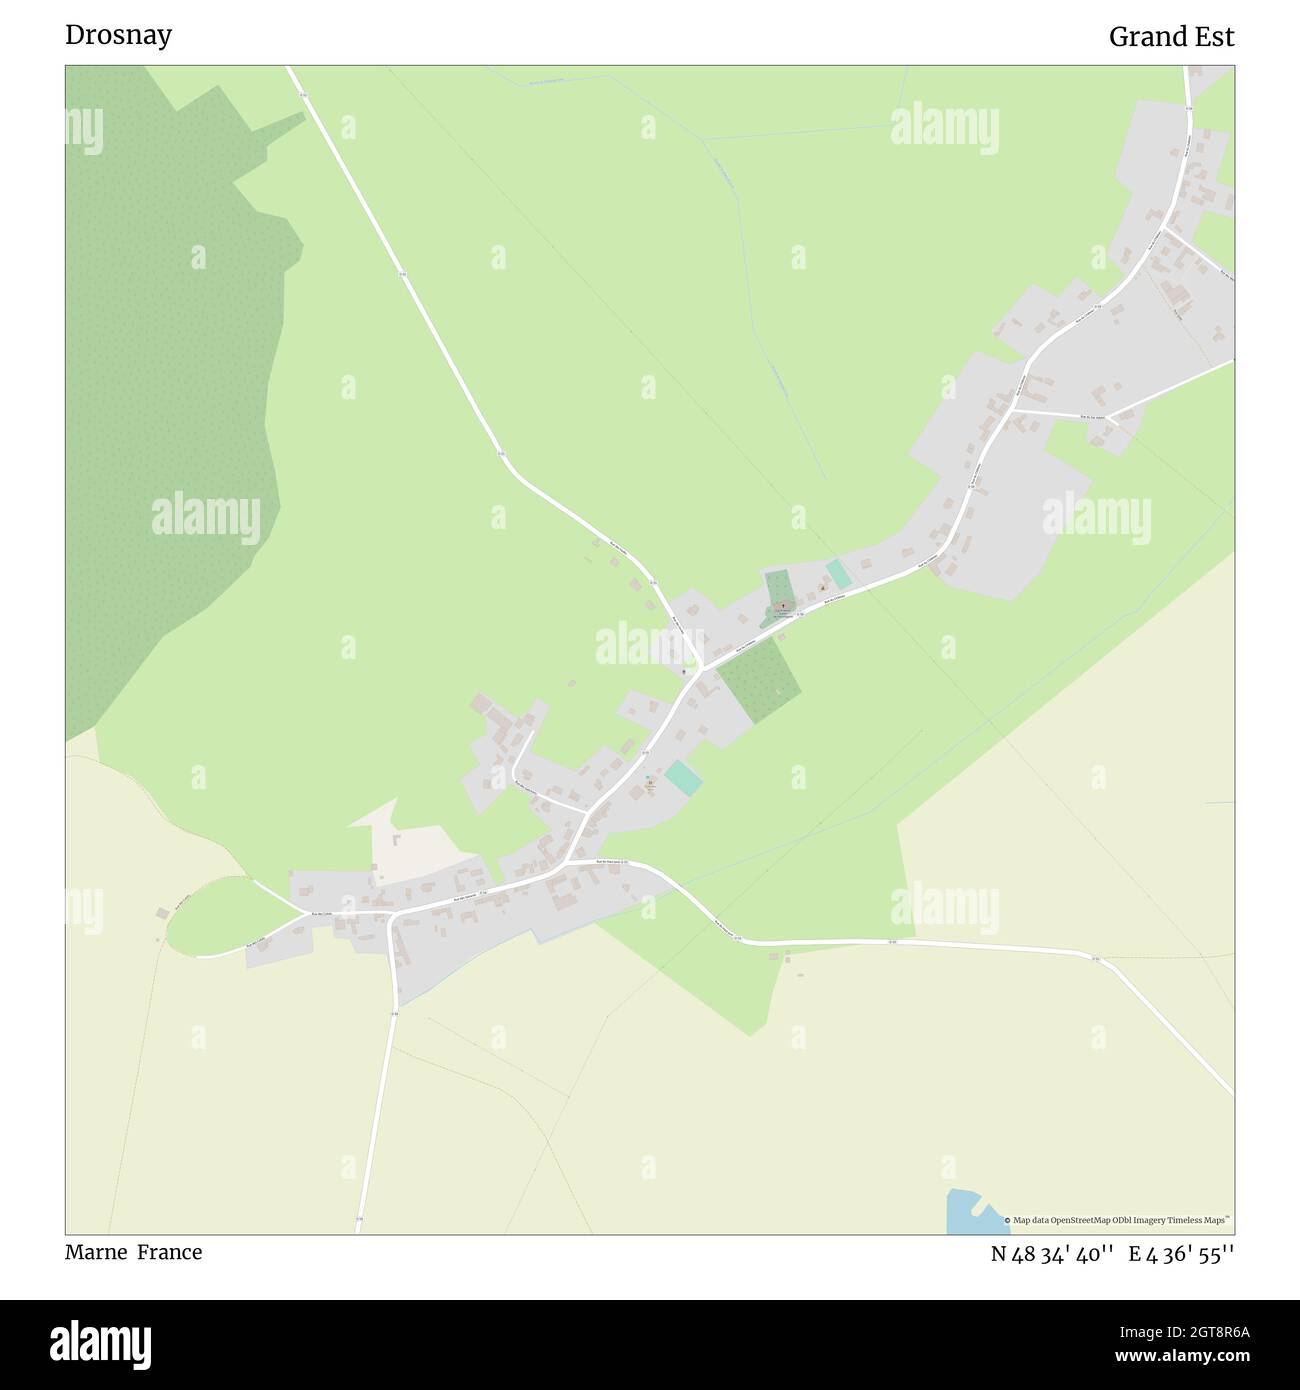 Drosnay, Marne, France, Grand Est, N 48 34' 40'', E 4 36' 55'', map, Timeless Map published in 2021. Travelers, explorers and adventurers like Florence Nightingale, David Livingstone, Ernest Shackleton, Lewis and Clark and Sherlock Holmes relied on maps to plan travels to the world's most remote corners, Timeless Maps is mapping most locations on the globe, showing the achievement of great dreams Stock Photo